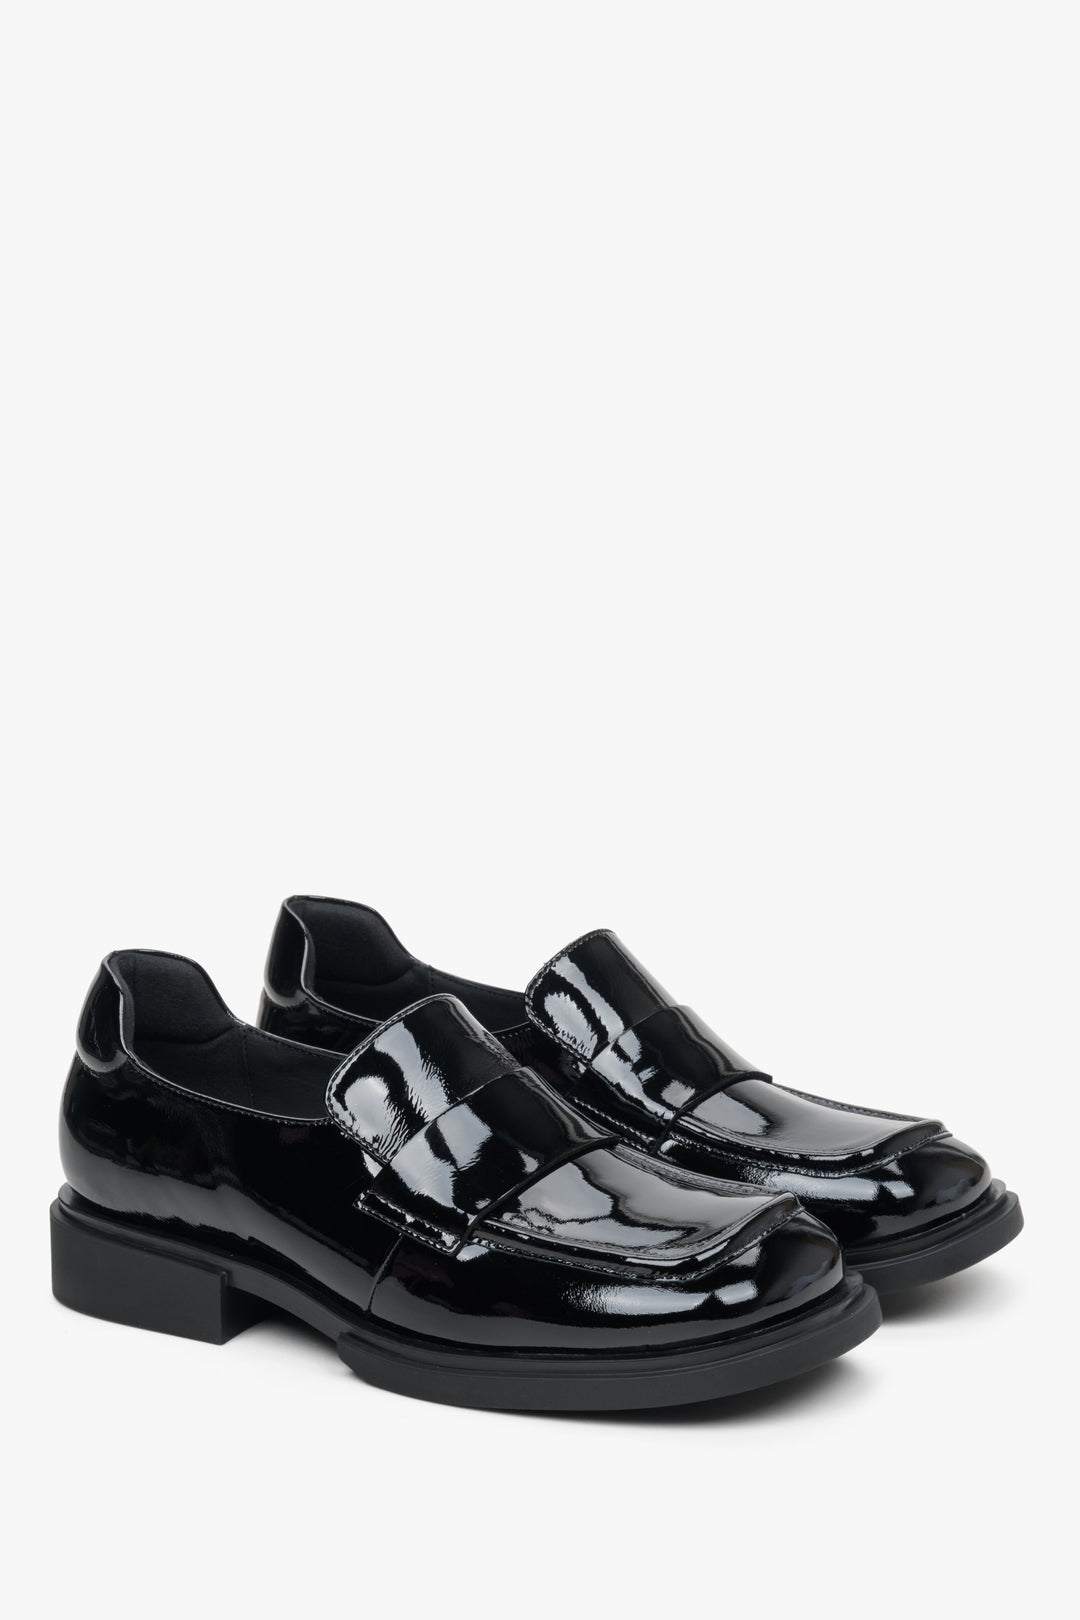 Women's black moccasins made of patent genuine leather by Estro.